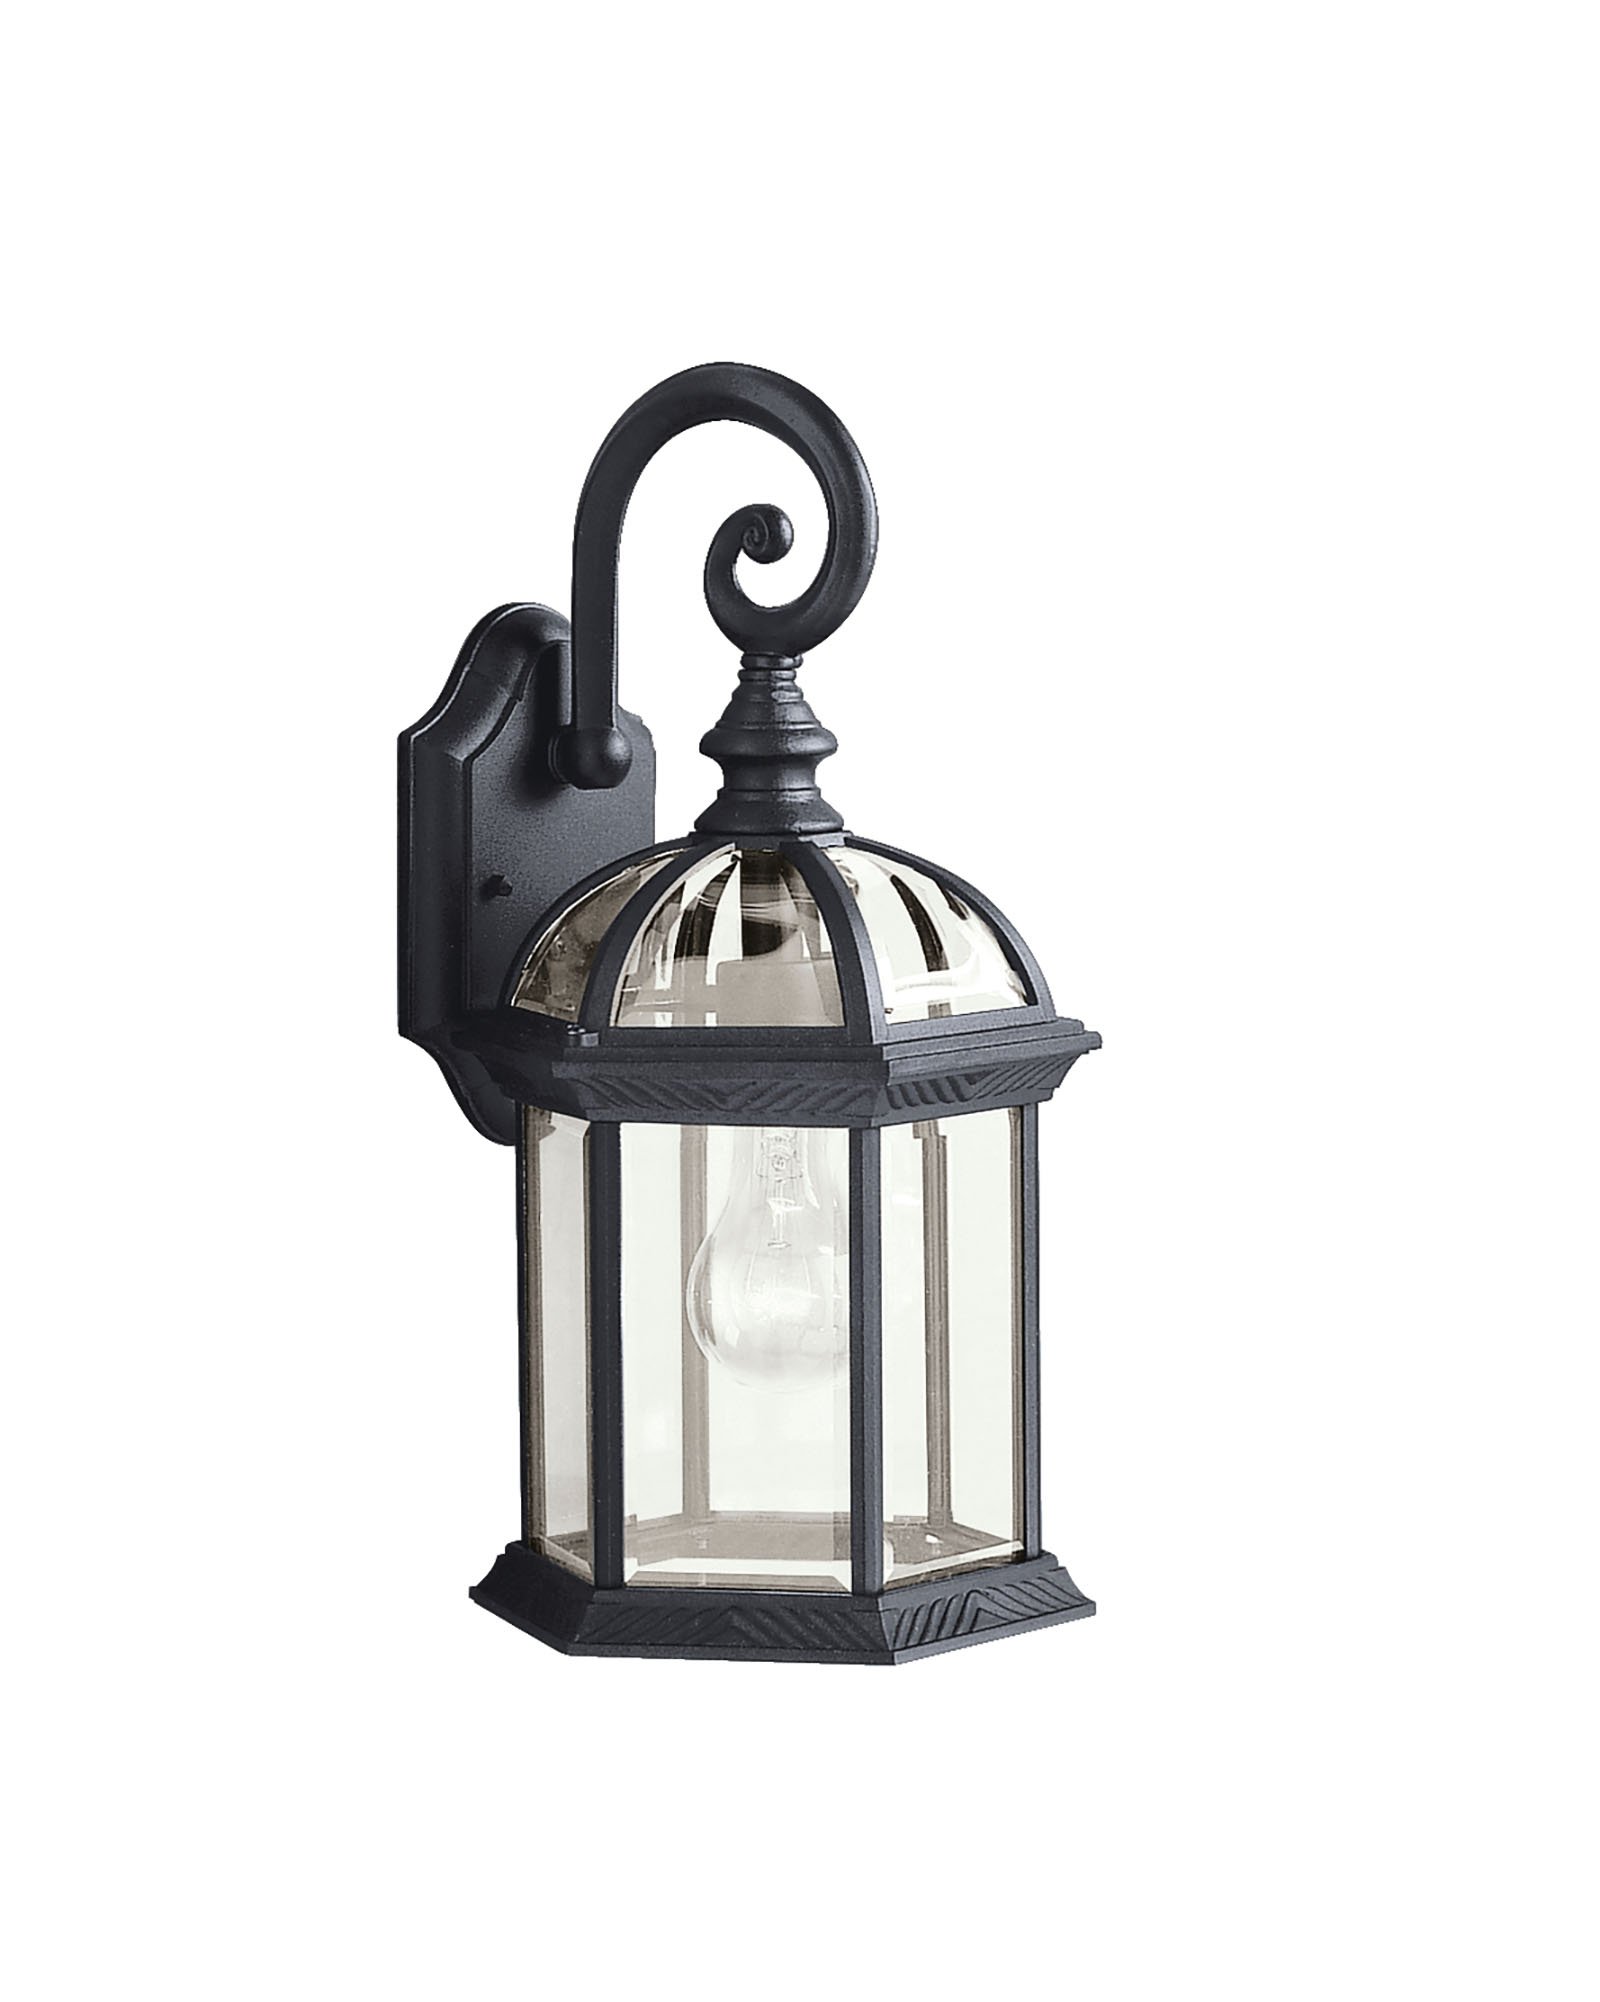 This 1 light wall lantern from the Barrie collection is a perfect outdoor embellishment with classic and sophisticated details. Made from cast aluminu...